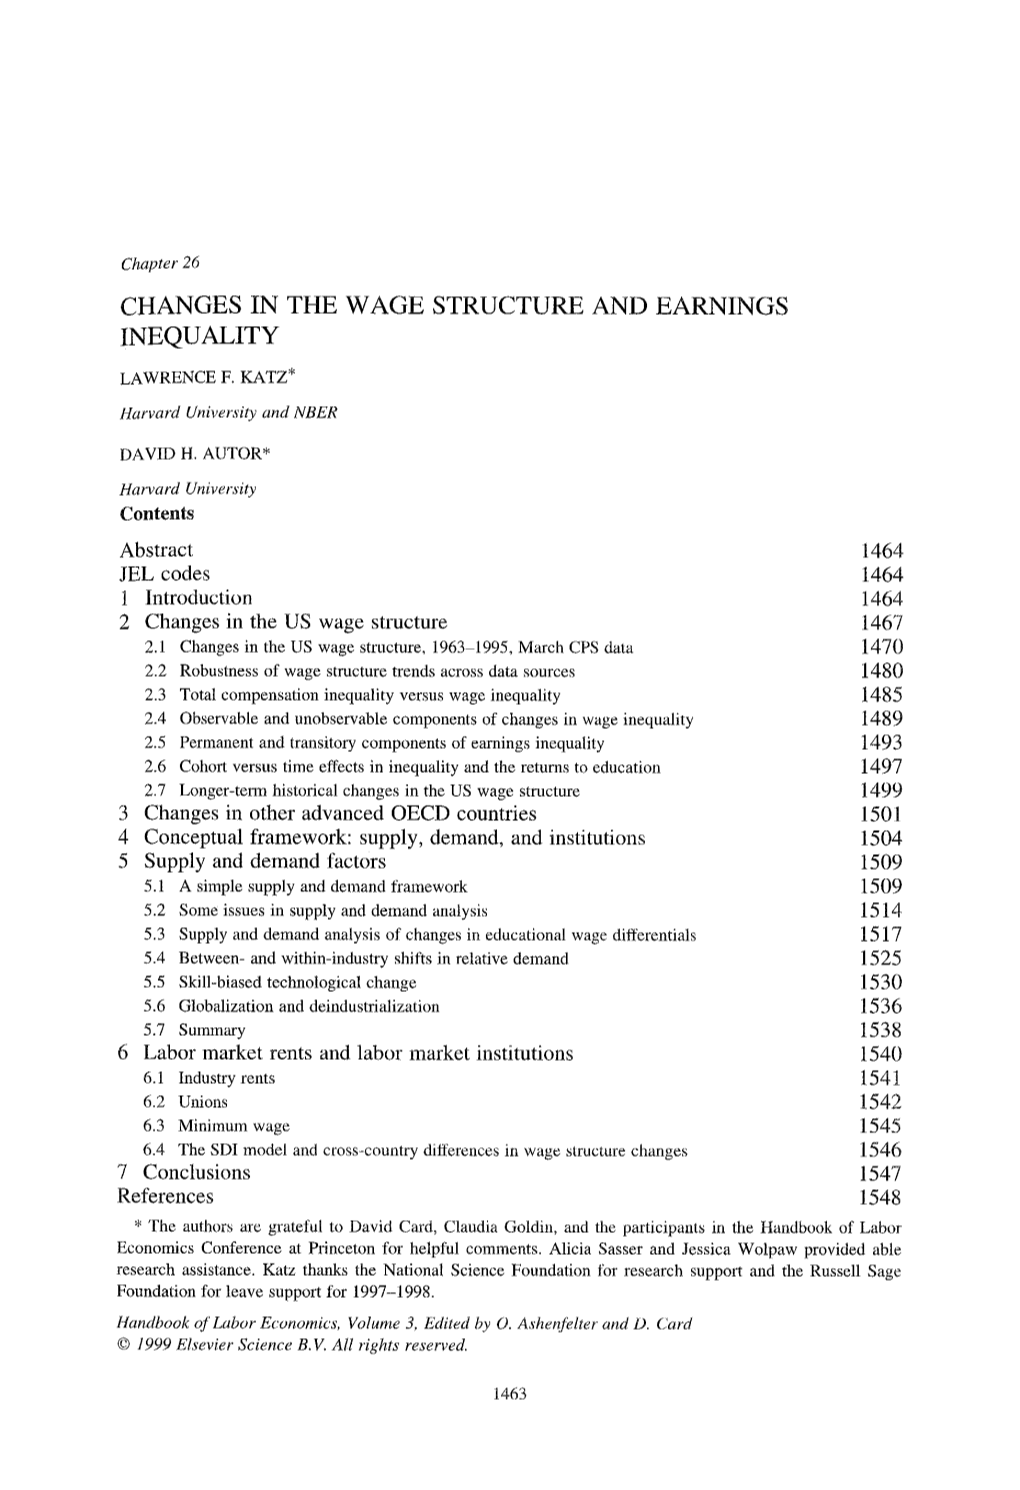 Changes in the Wage Structure and Earnings Inequality